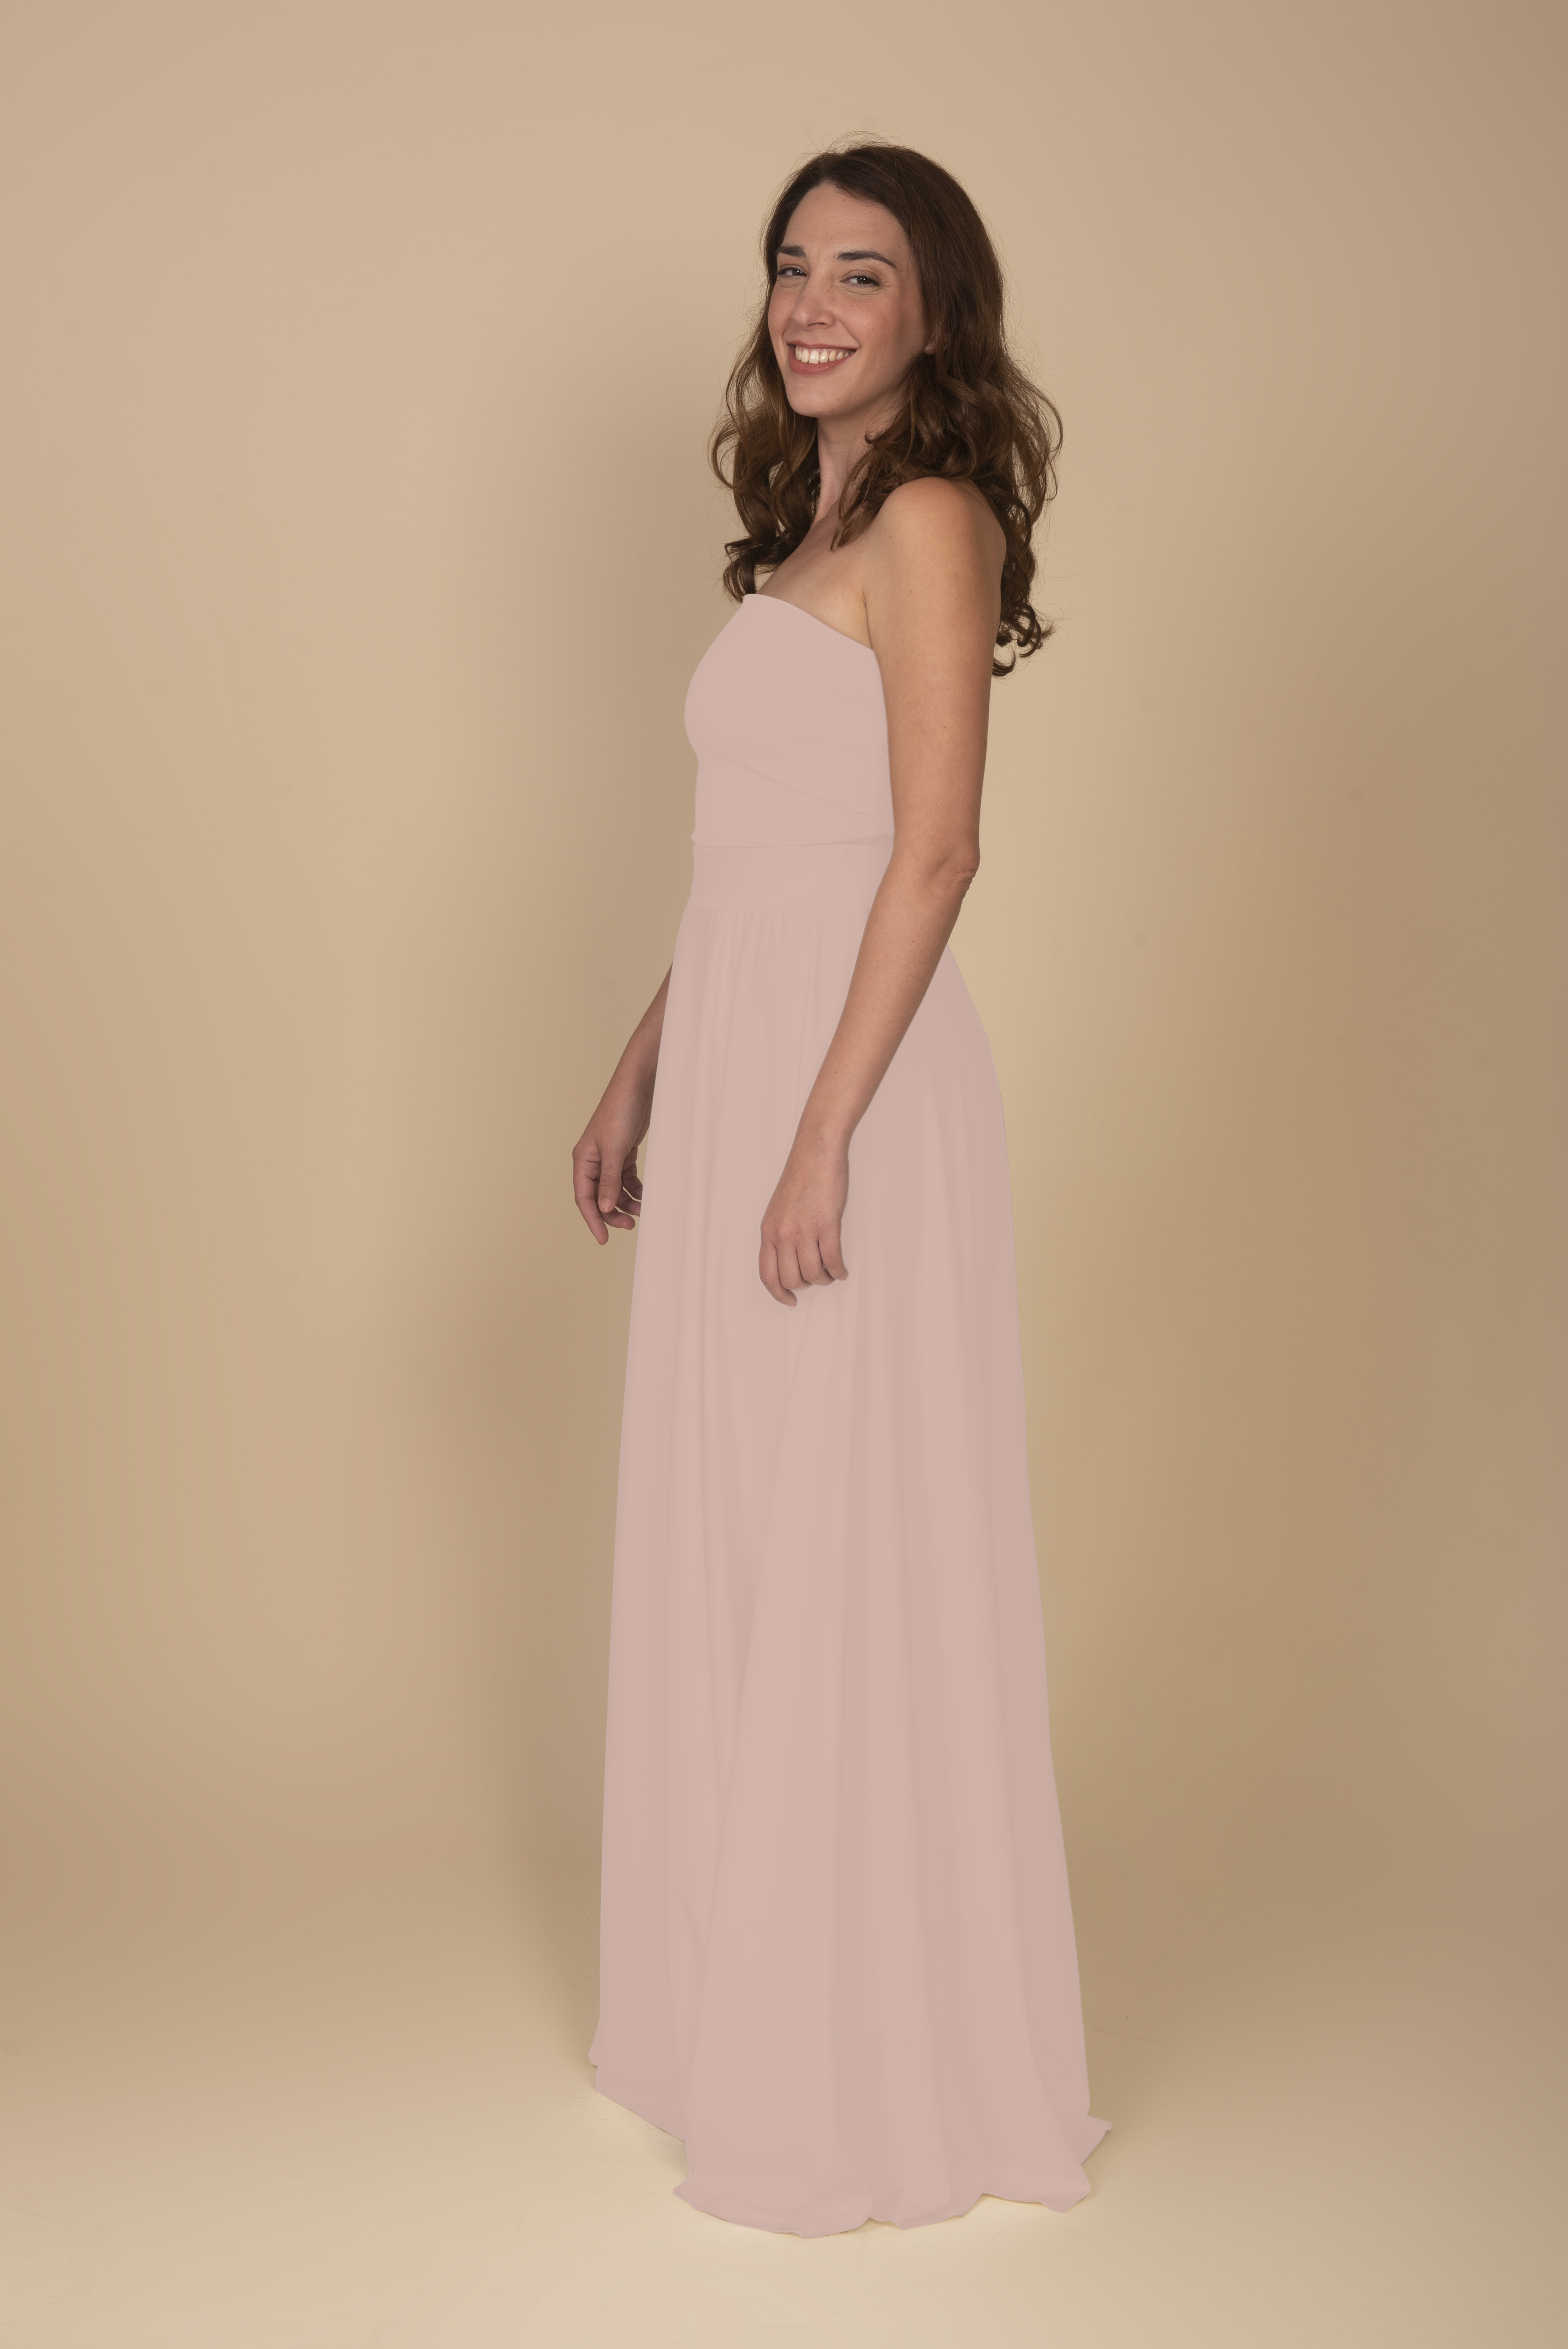 LONG SKIRT IN PALE PINK by Infinit Barcelona